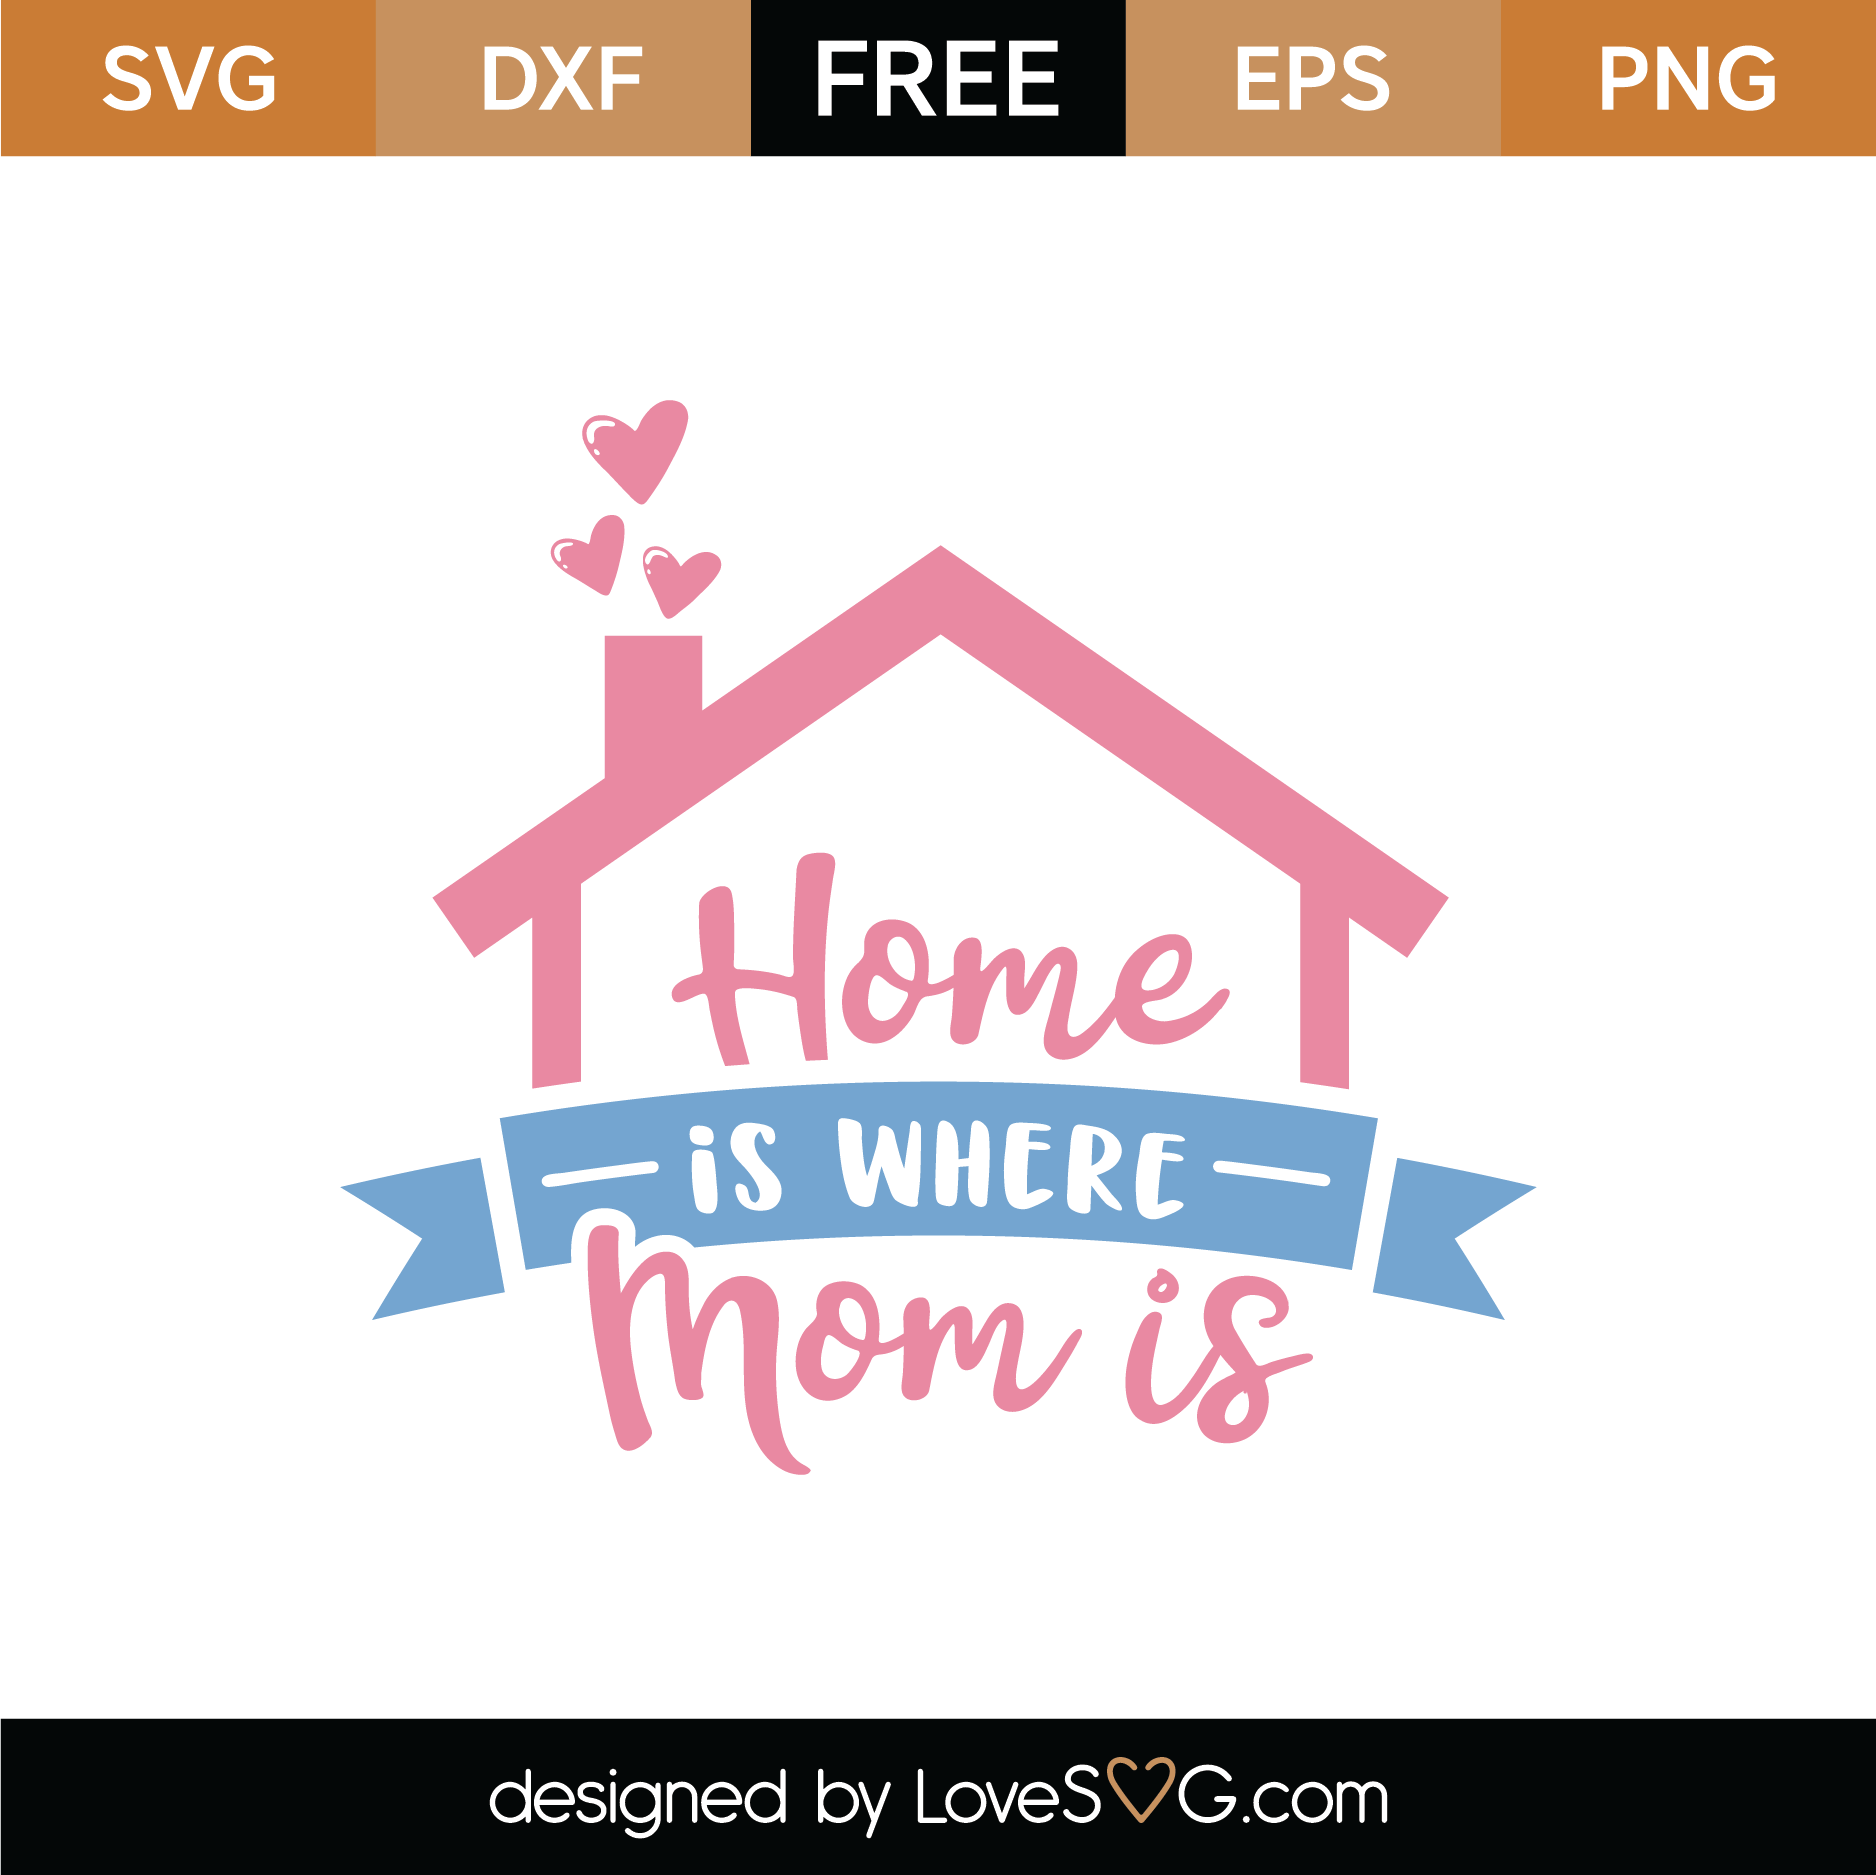 Download Free Home Is Where Mom Is SVG Cut File | Lovesvg.com